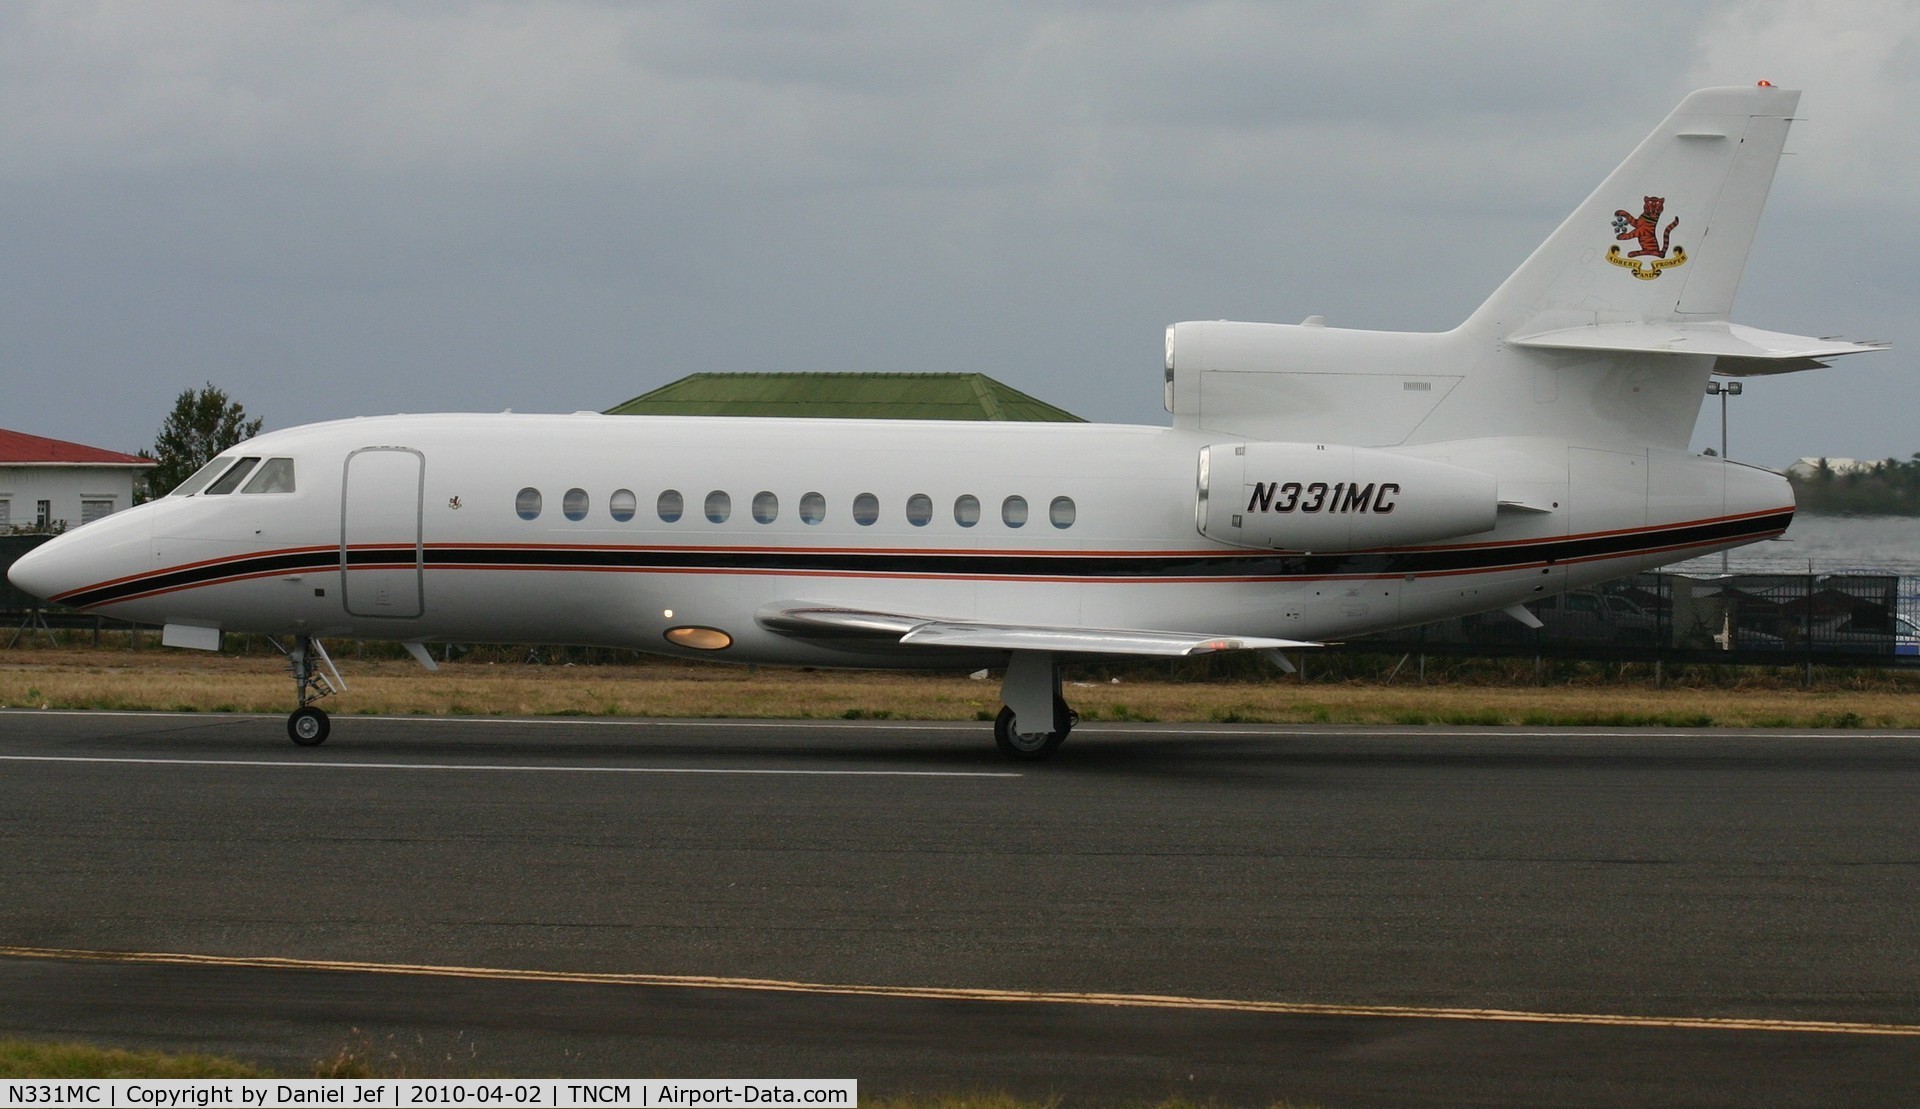 N331MC, 1997 Dassault Falcon 900EX C/N 22, N331MC just landed at TNCM runway 10 now back tracking the active for parking